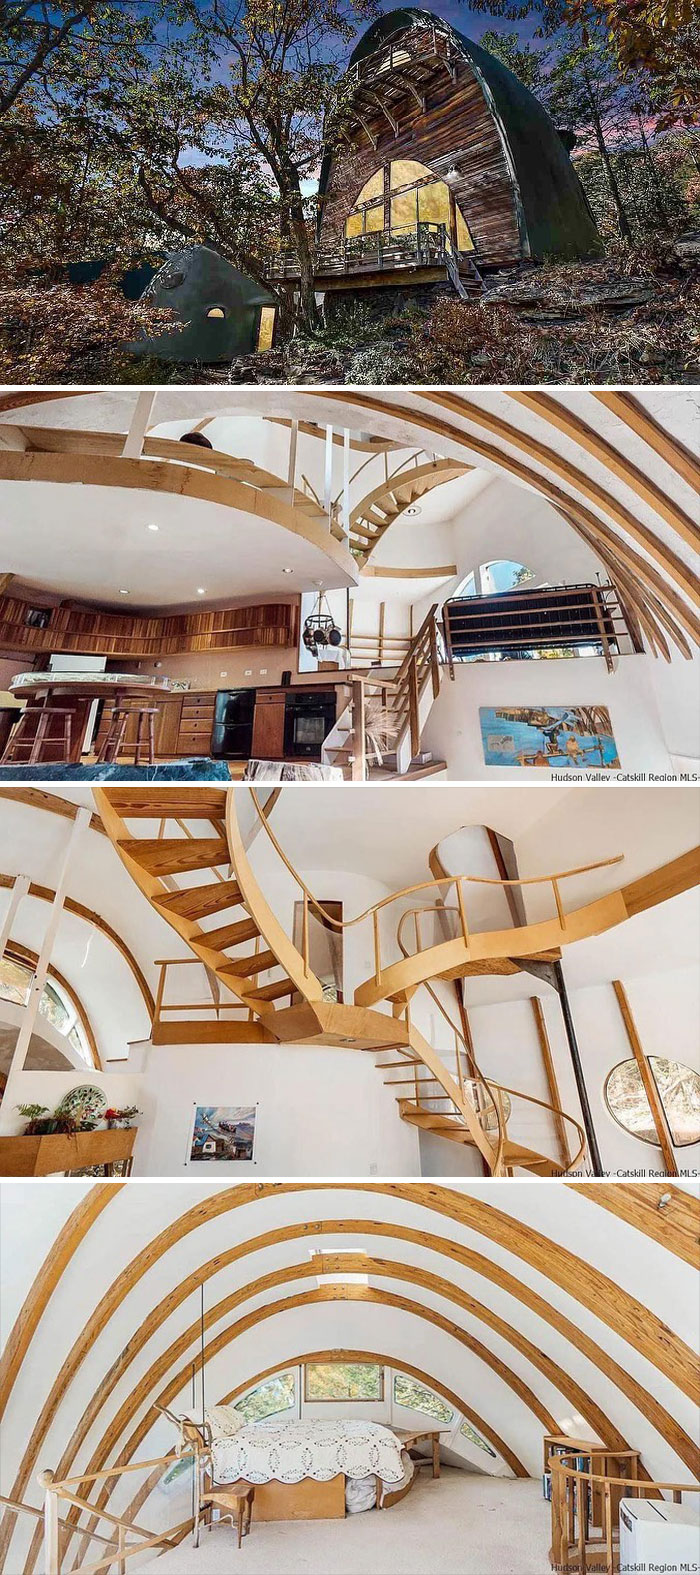 I Found The Full House With The Wacky Escher Stairs!!! It’s Quite Something